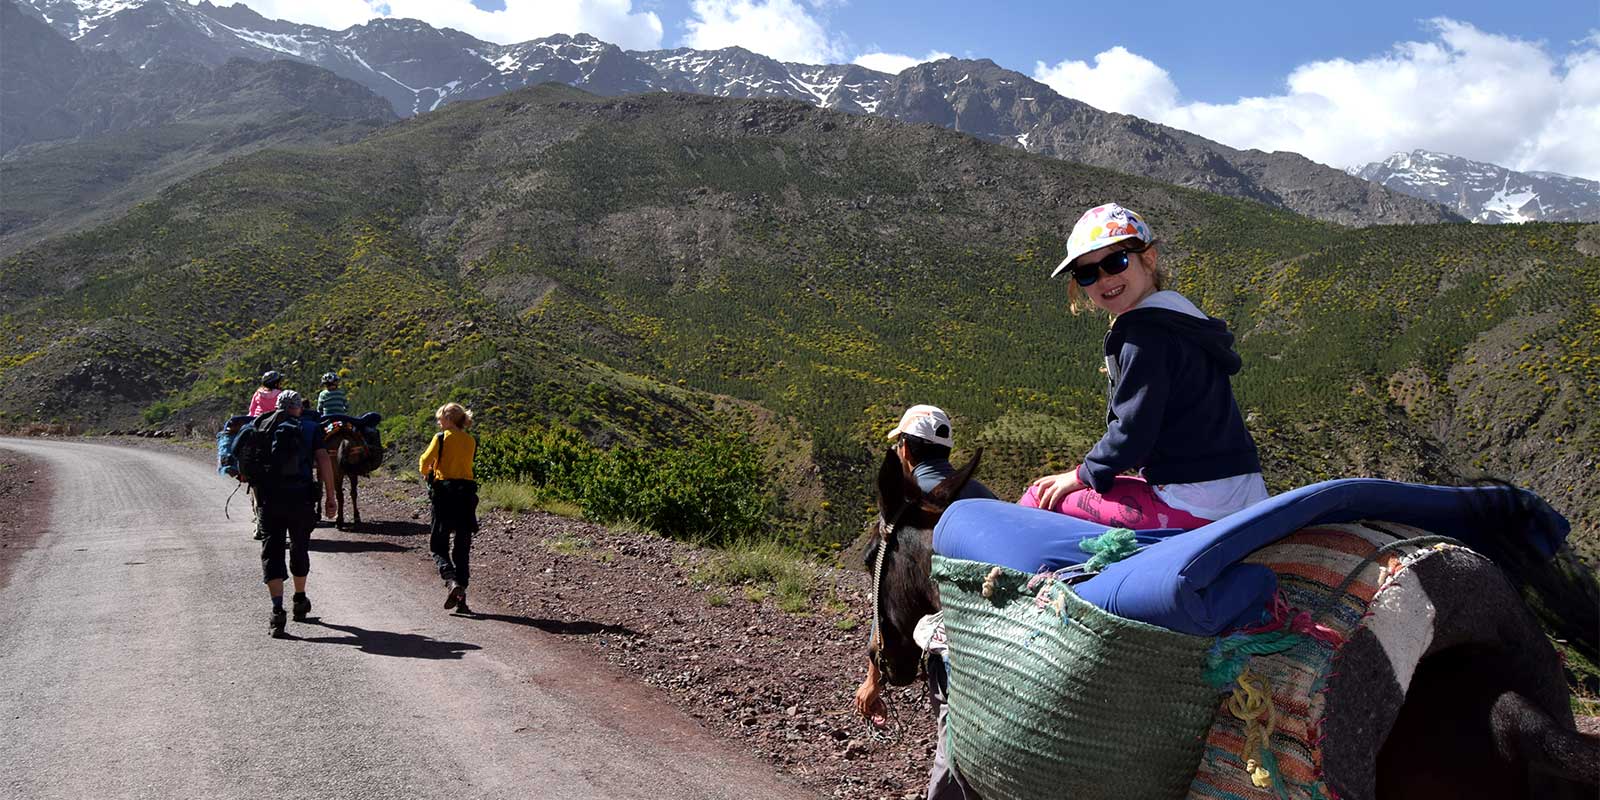 Mule ride up the Atlas Mountains in Morocco